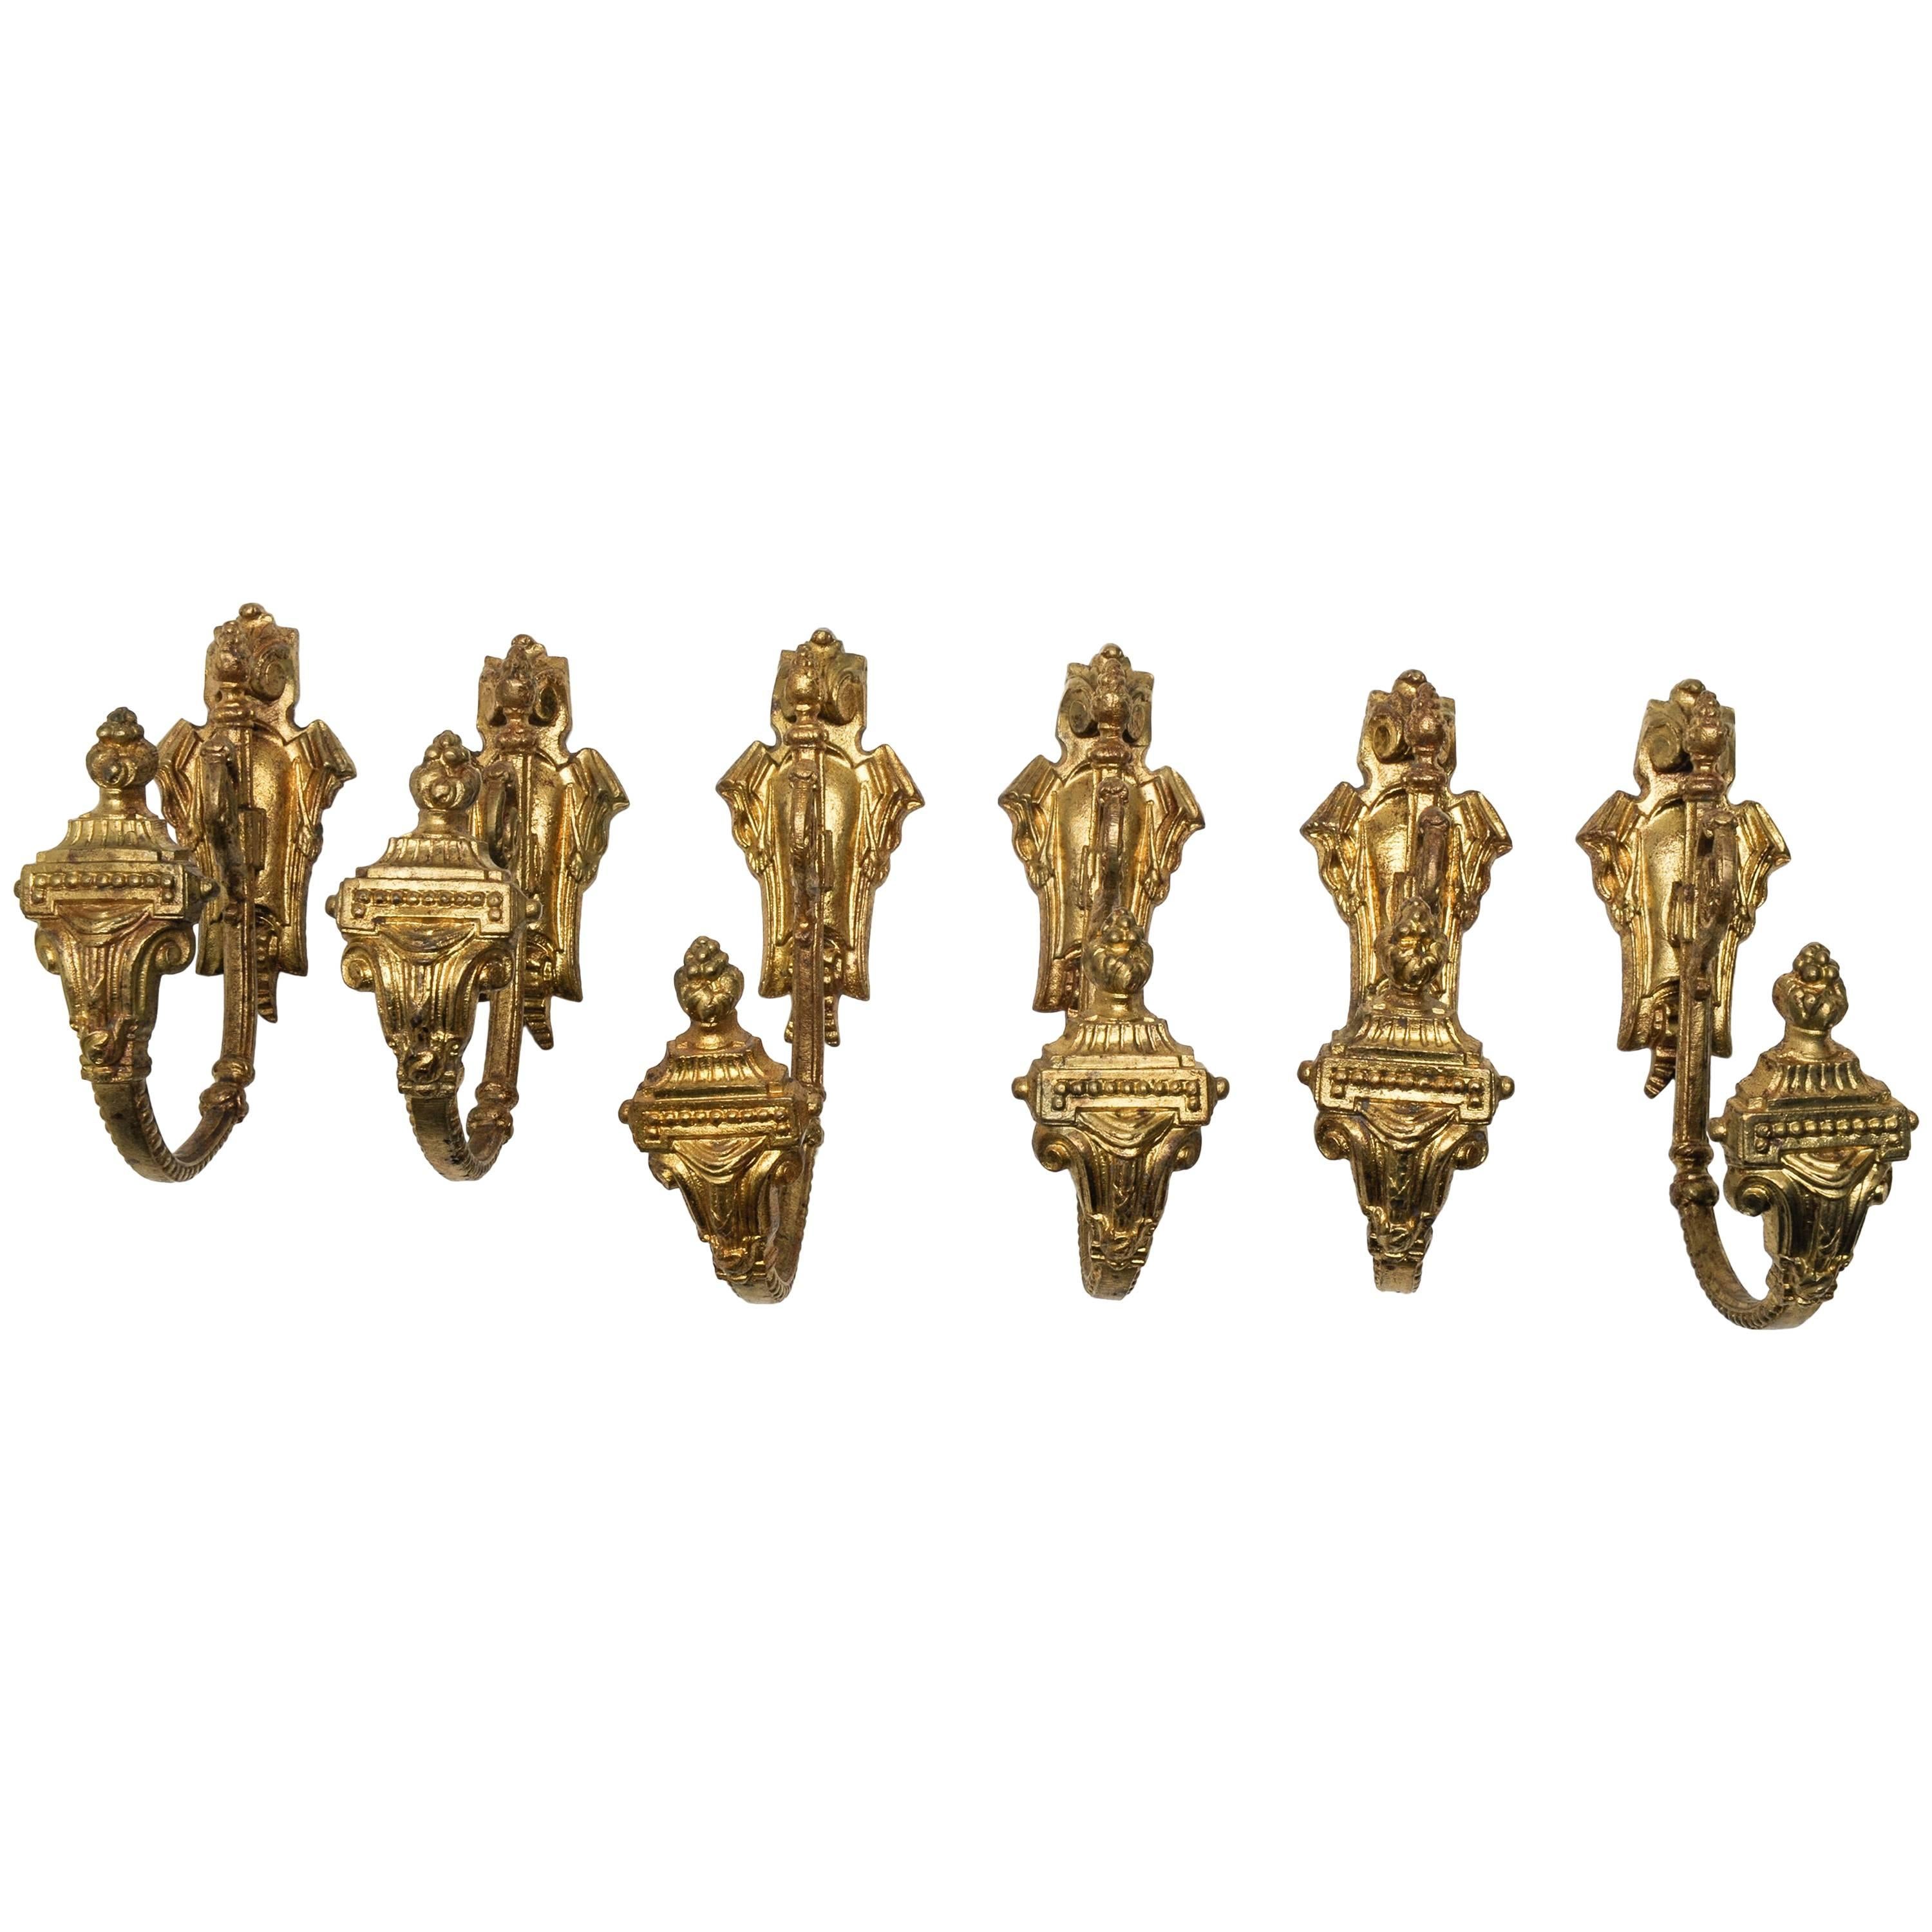 Old Elegant bronze  Courtain Supports or Tiebacks - Six -